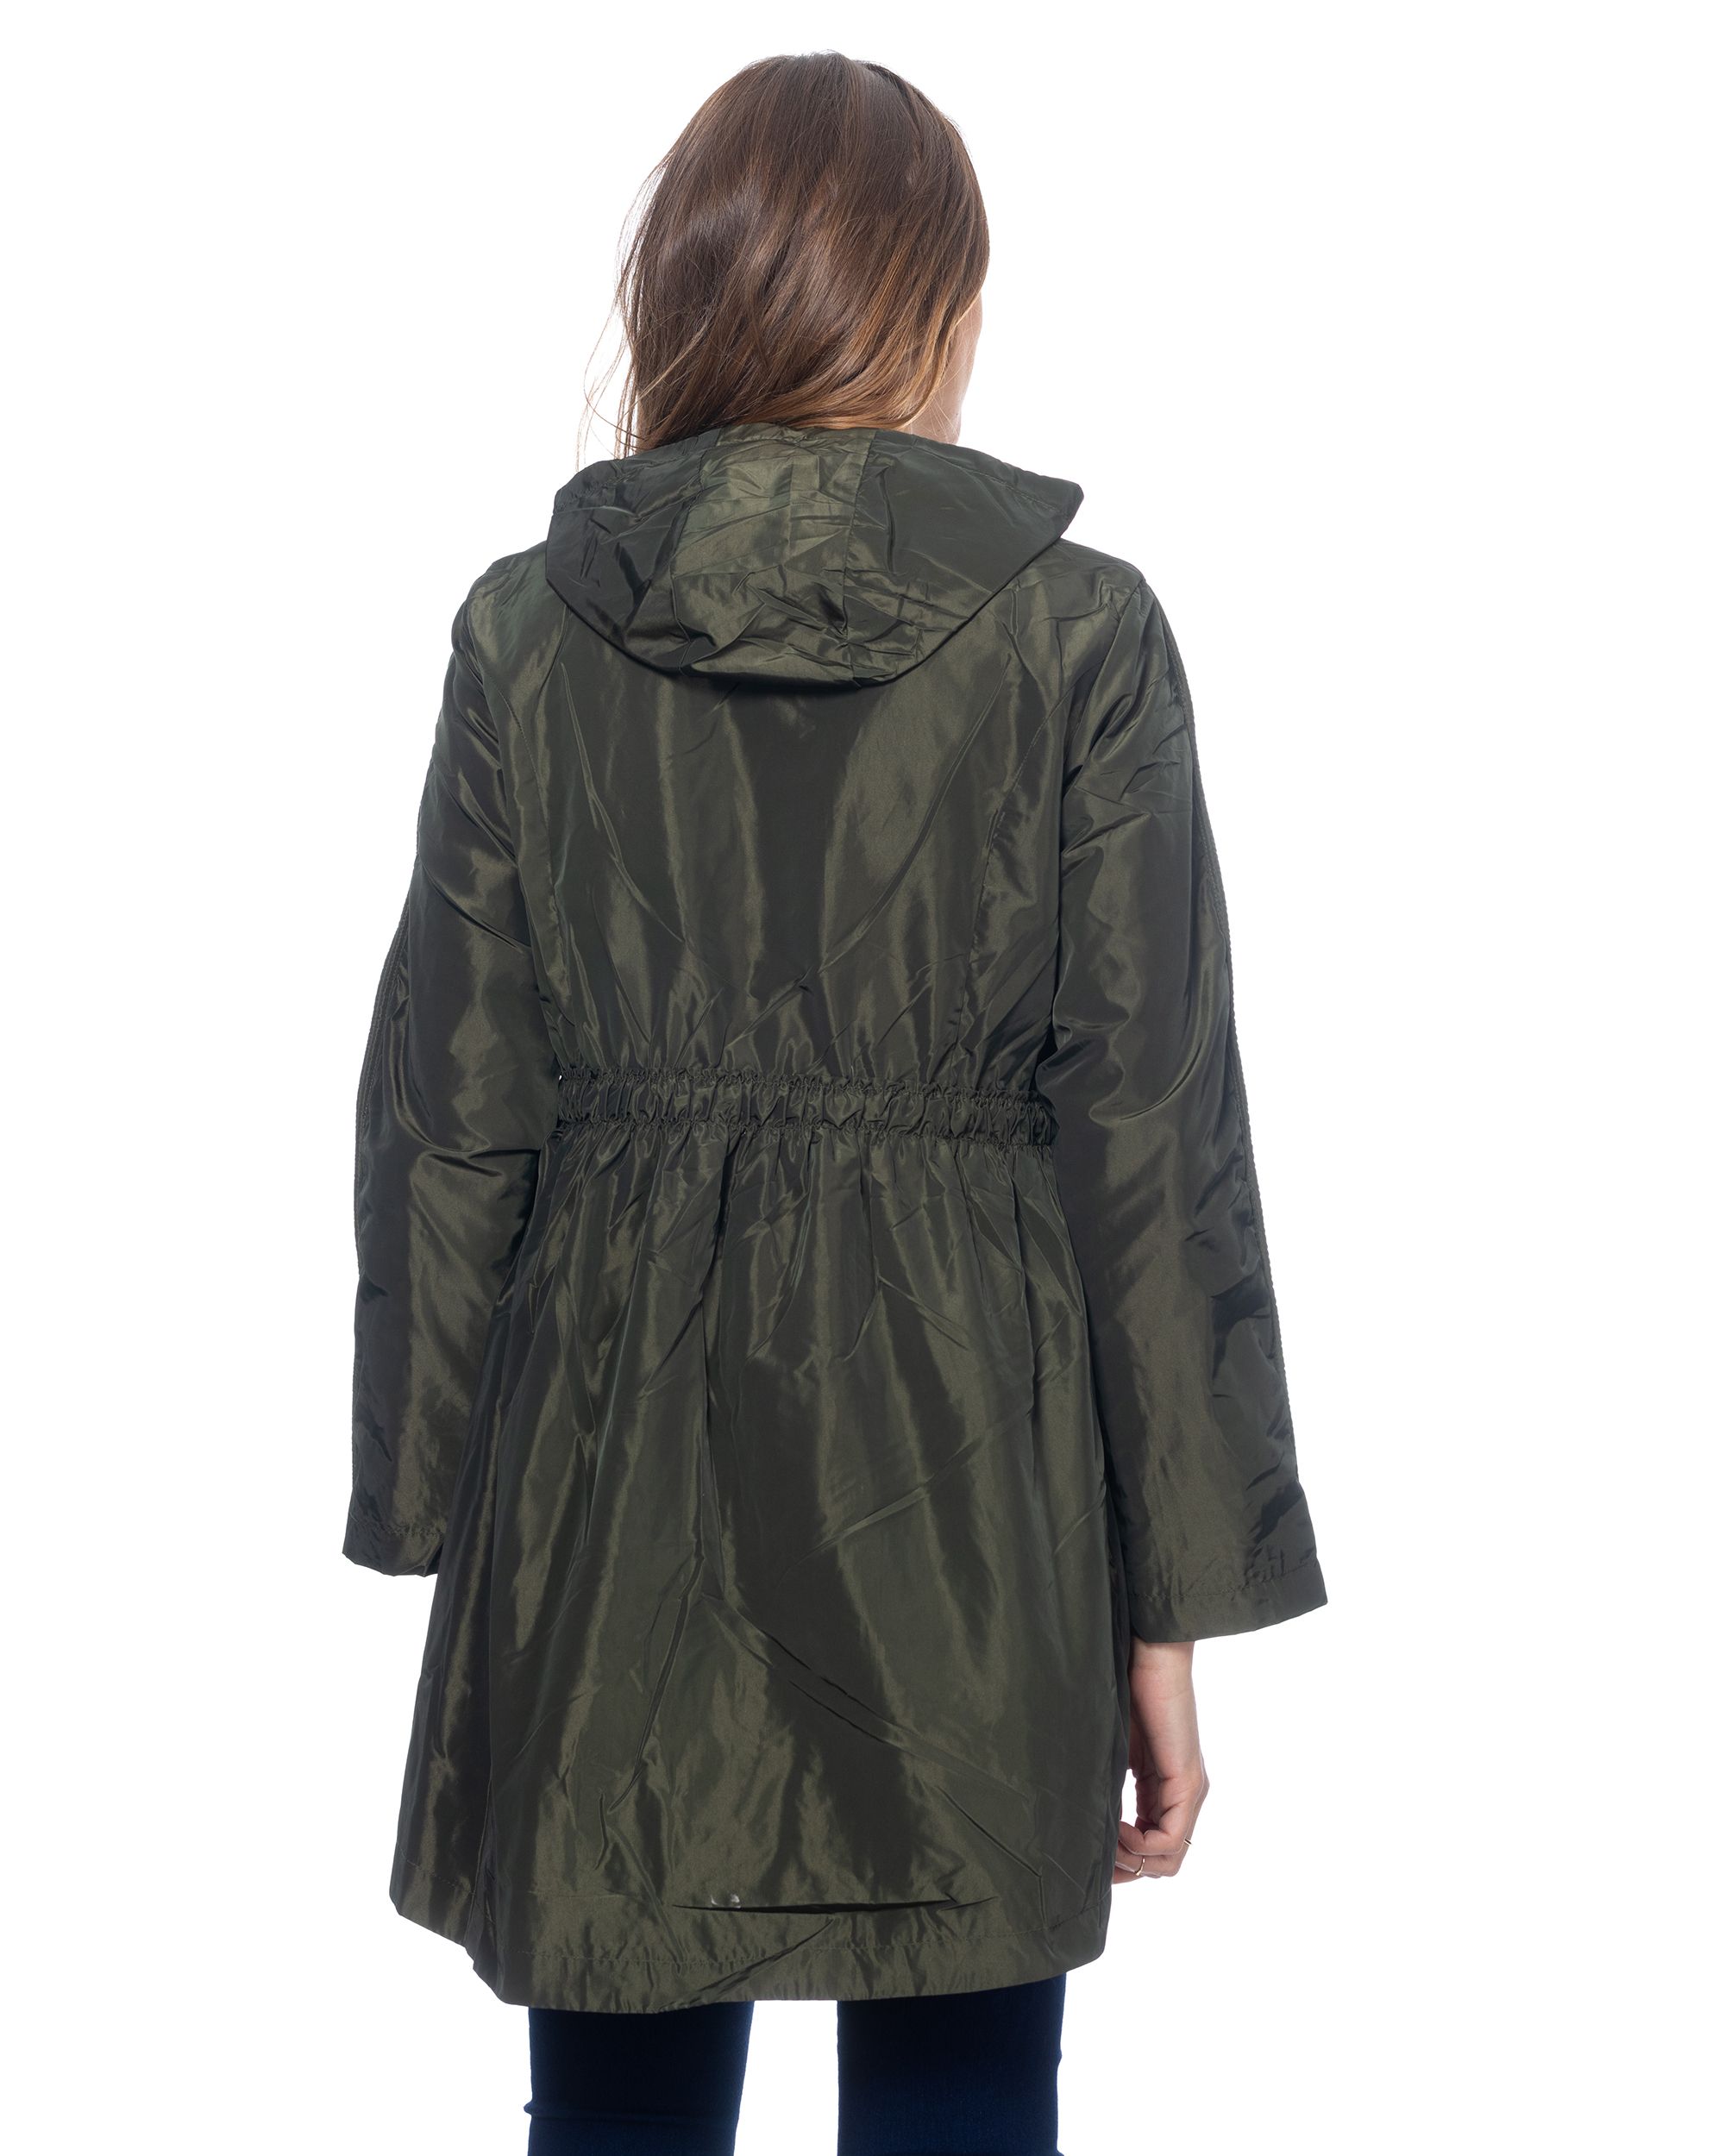 Long Jacket With Hood Elastic Waist With Strings And Side Pockets